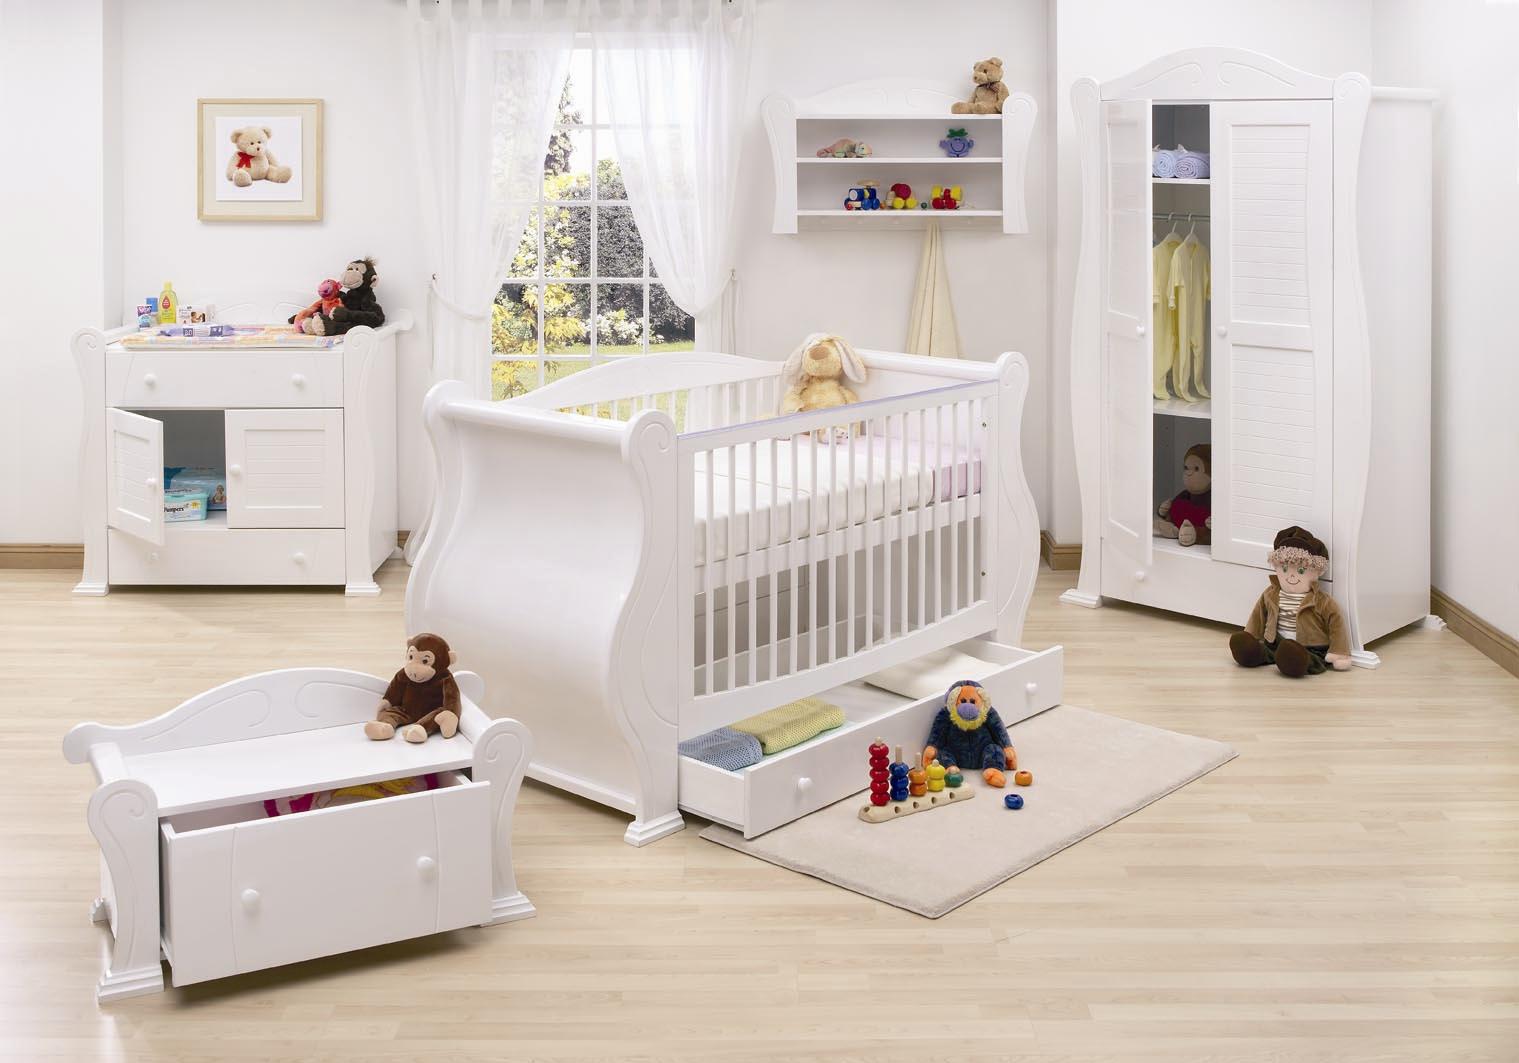 Baby room furniture sets Image from: Baby room furniture sets Design UYMPFHV